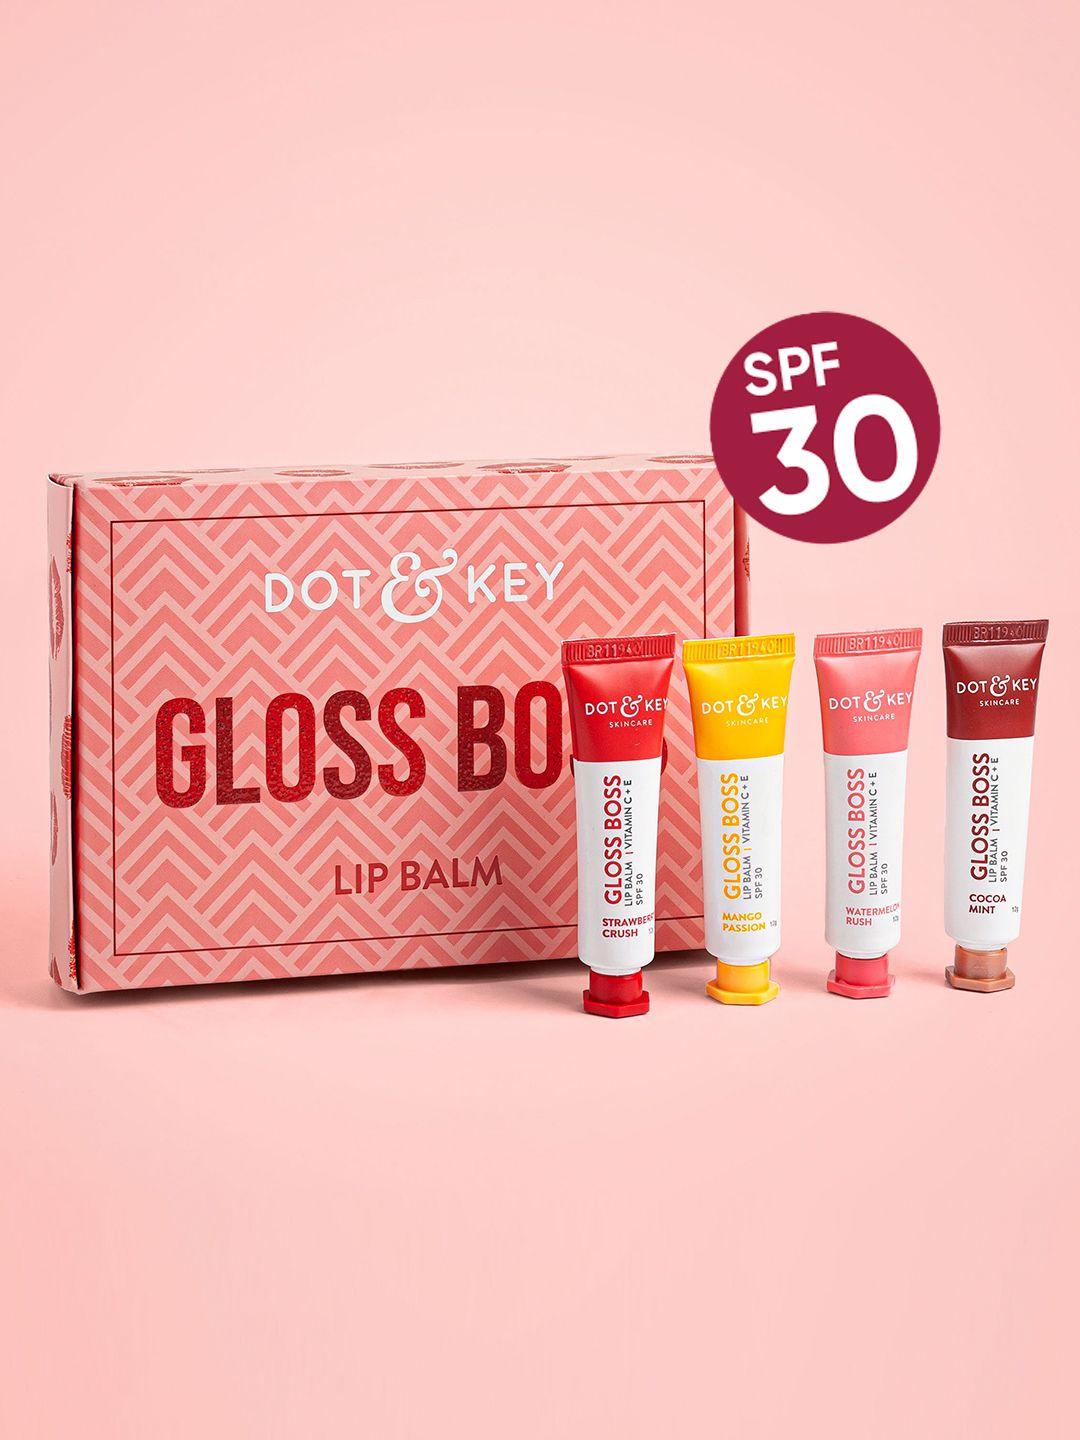 DOT & KEY Glossy & Fruity Lip Care Gift Kit with SPF30 - Cures Dry, Chapped & Dark Lips